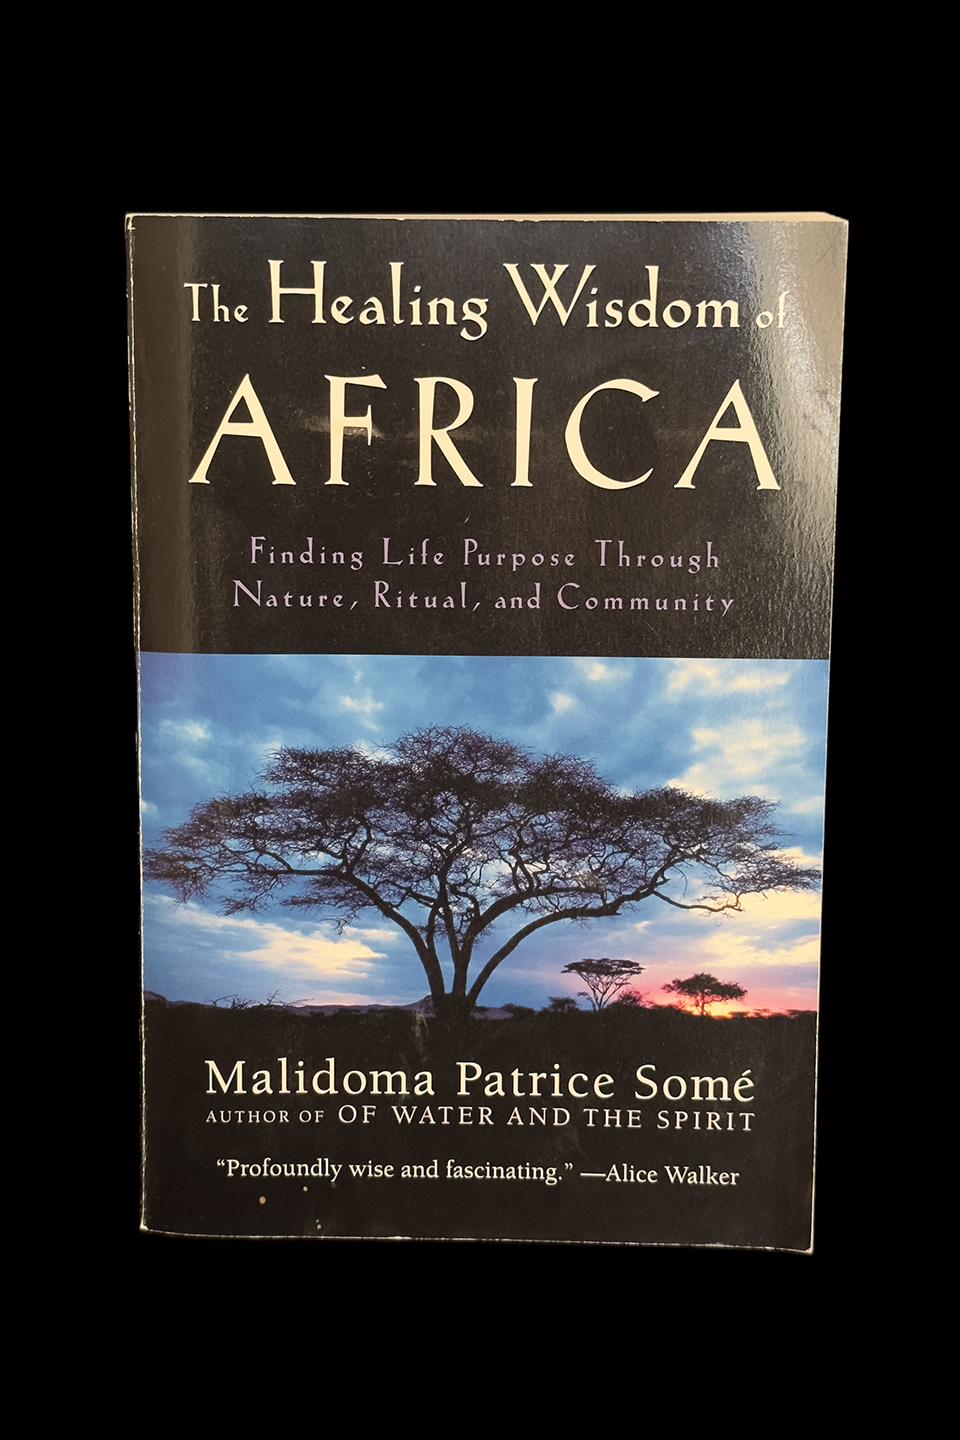 The Healing Wisdom of Africa: Finding Life Purpose Through Nature, Ritual, and Community -  by Malidoma Patrice Some 